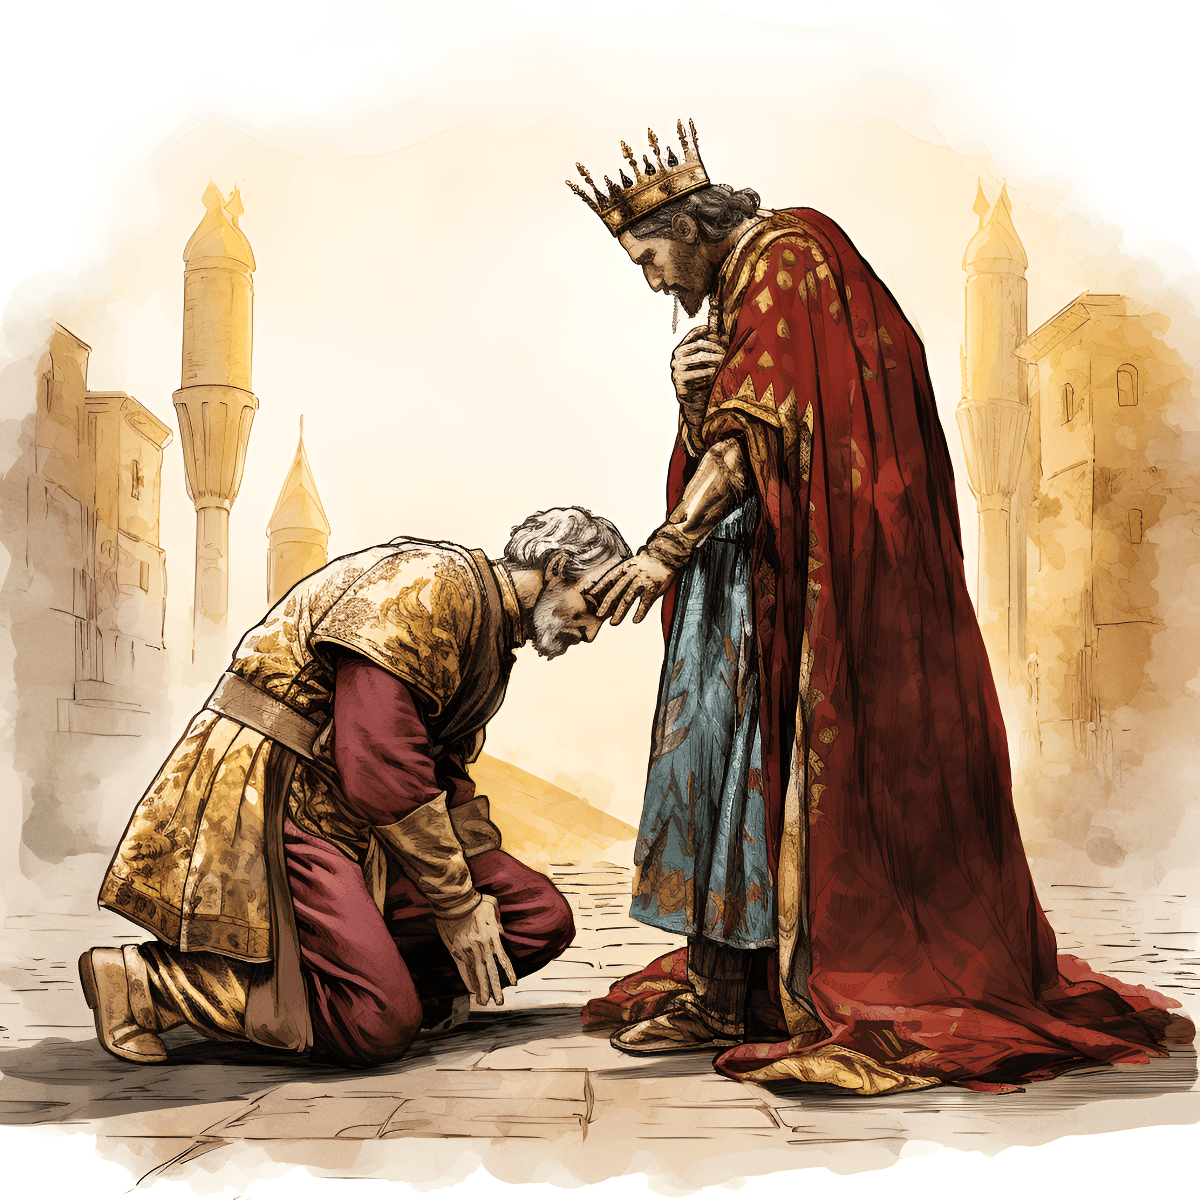 man bowing before a king